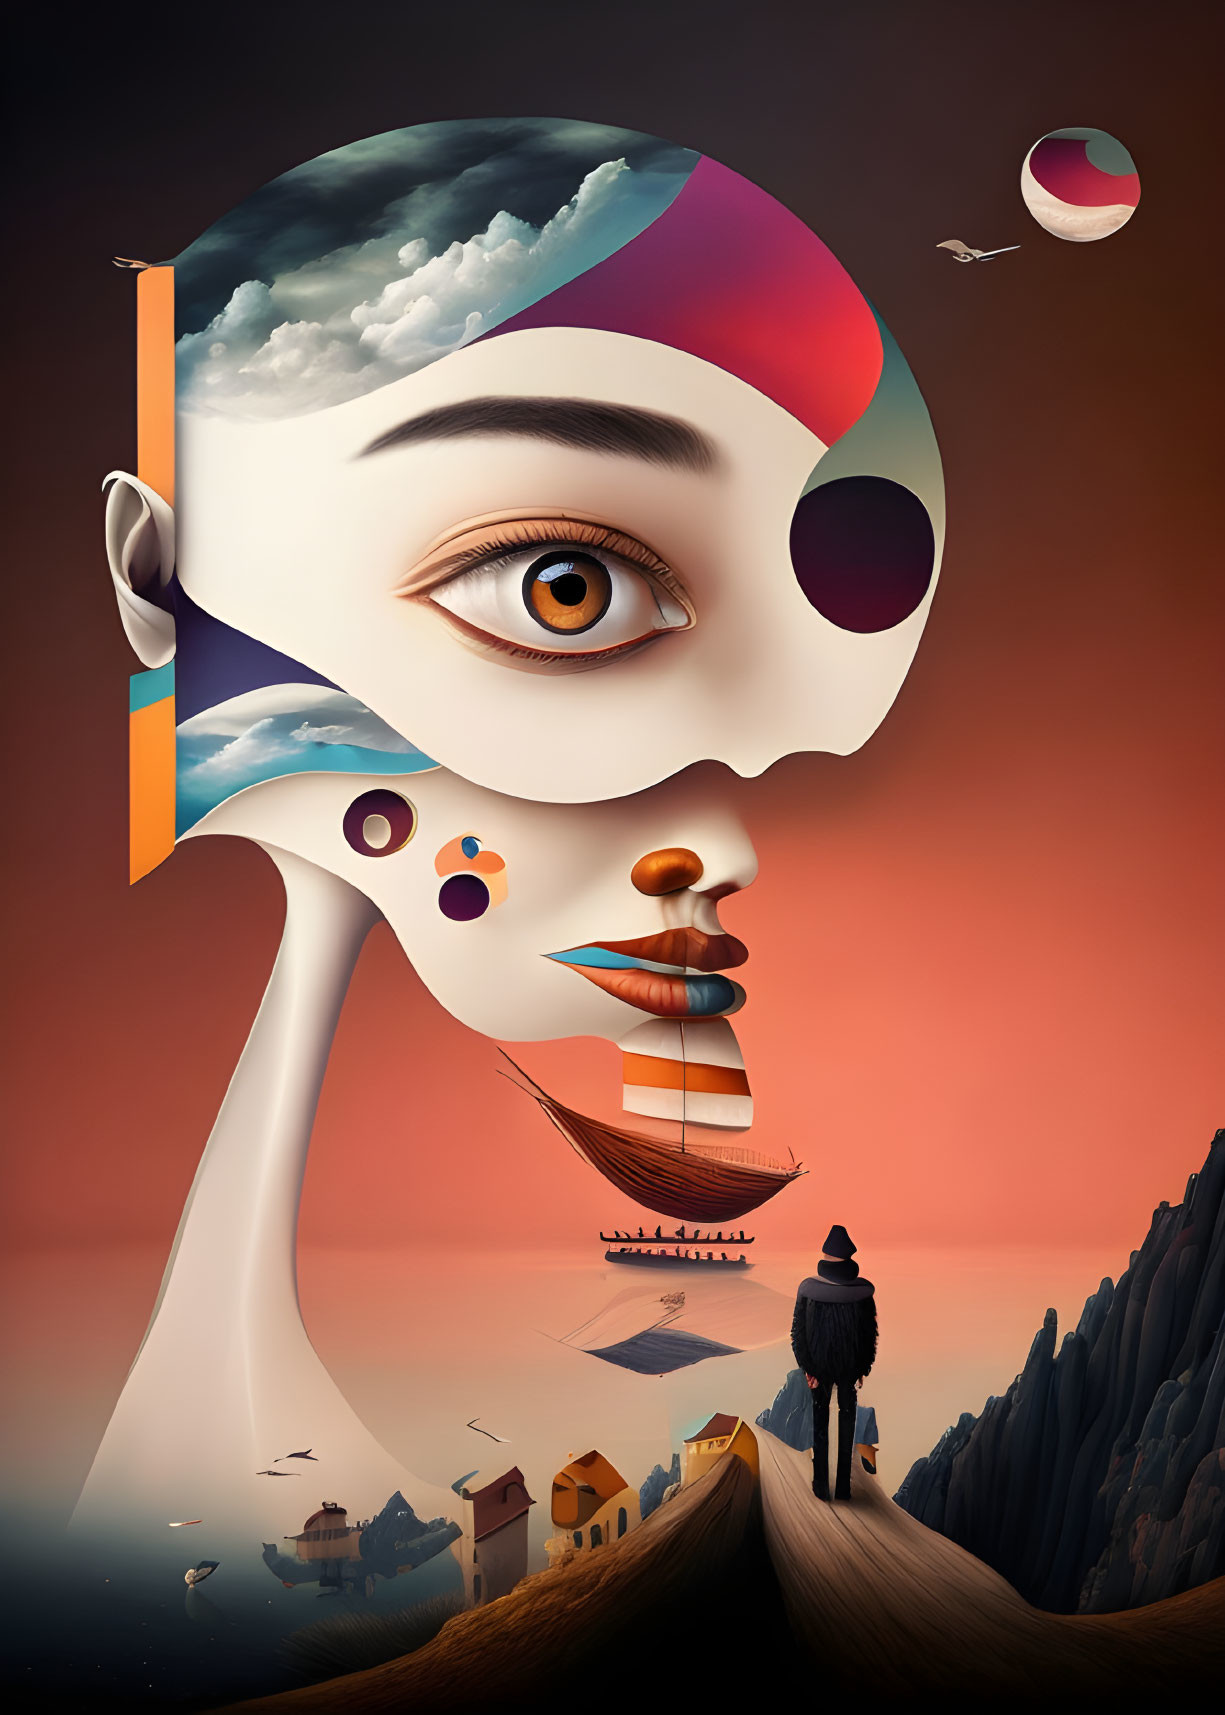 Surreal digital artwork: humanoid figure with sliced face, abstract layers, boat, houses, solitary